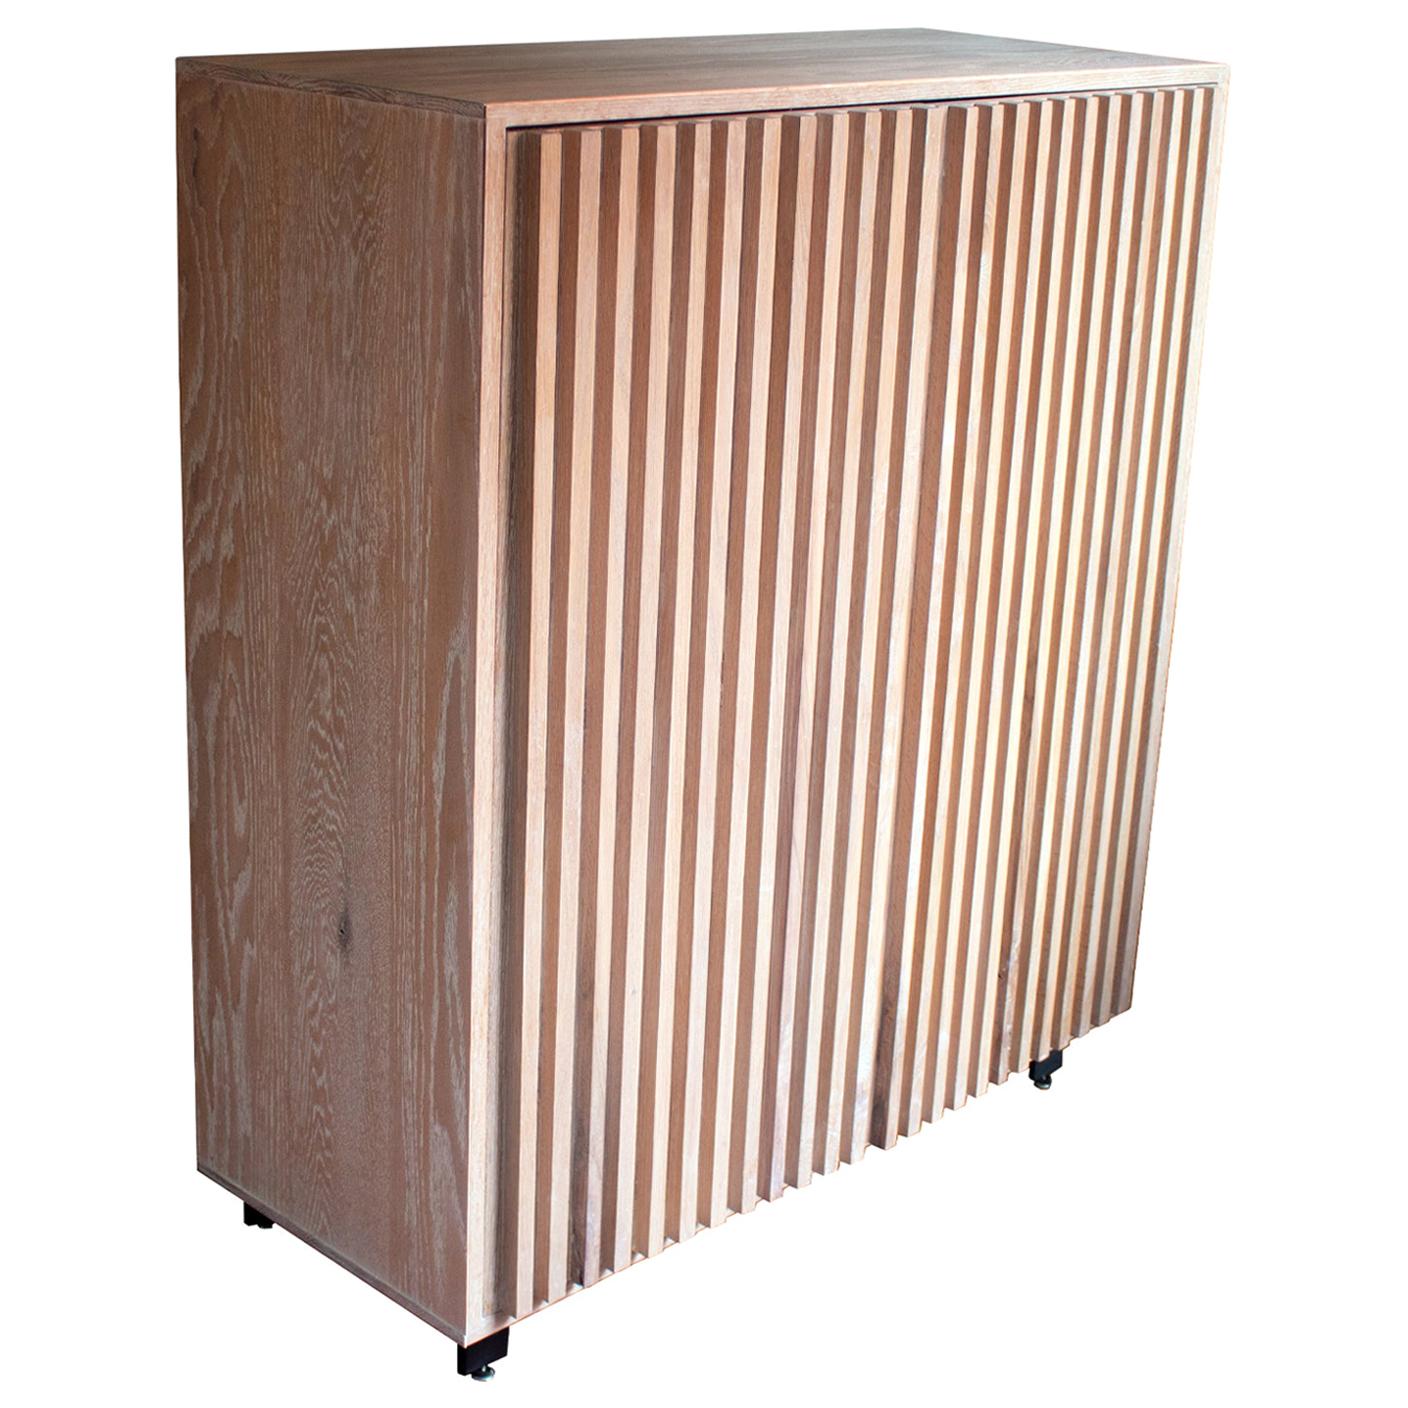 Constantine Solid Oak Cabinet with Slatted Doors in White Finish